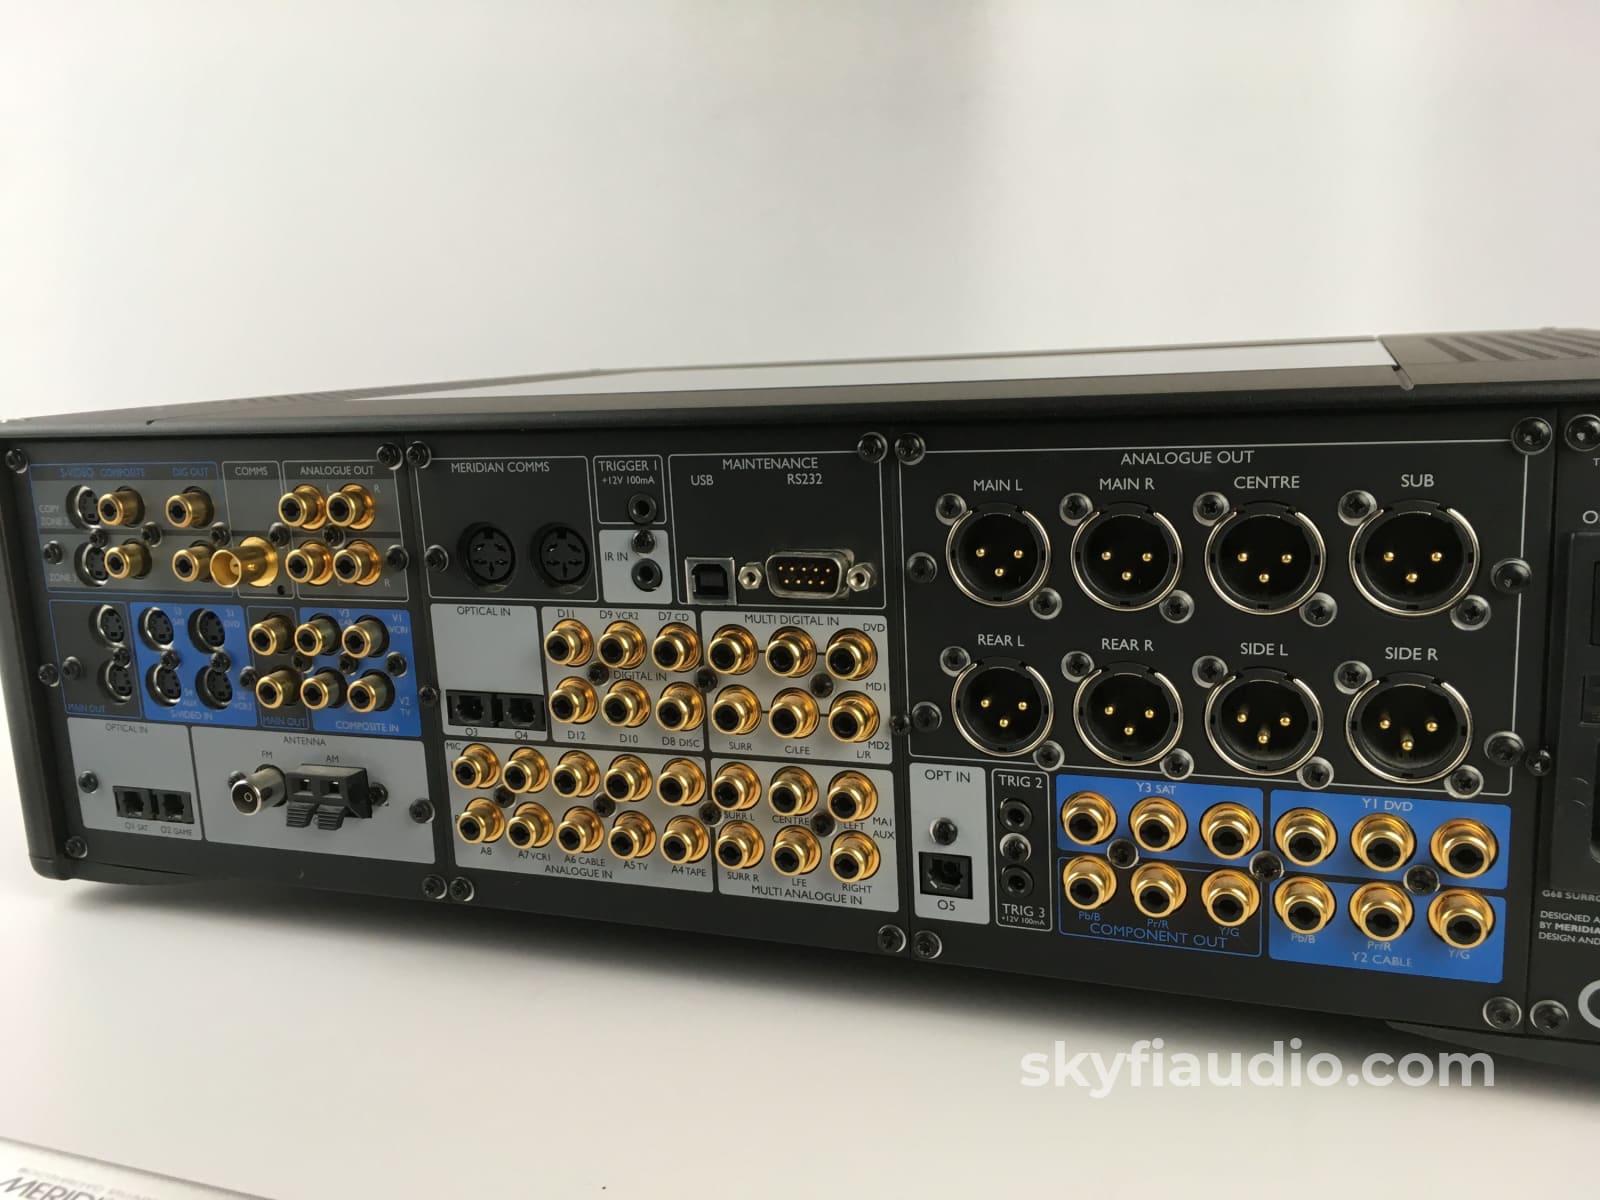 Meridian G68Xxv - Av Processor With Xlr Audio In/Out And Remote Perfect Preamplifier